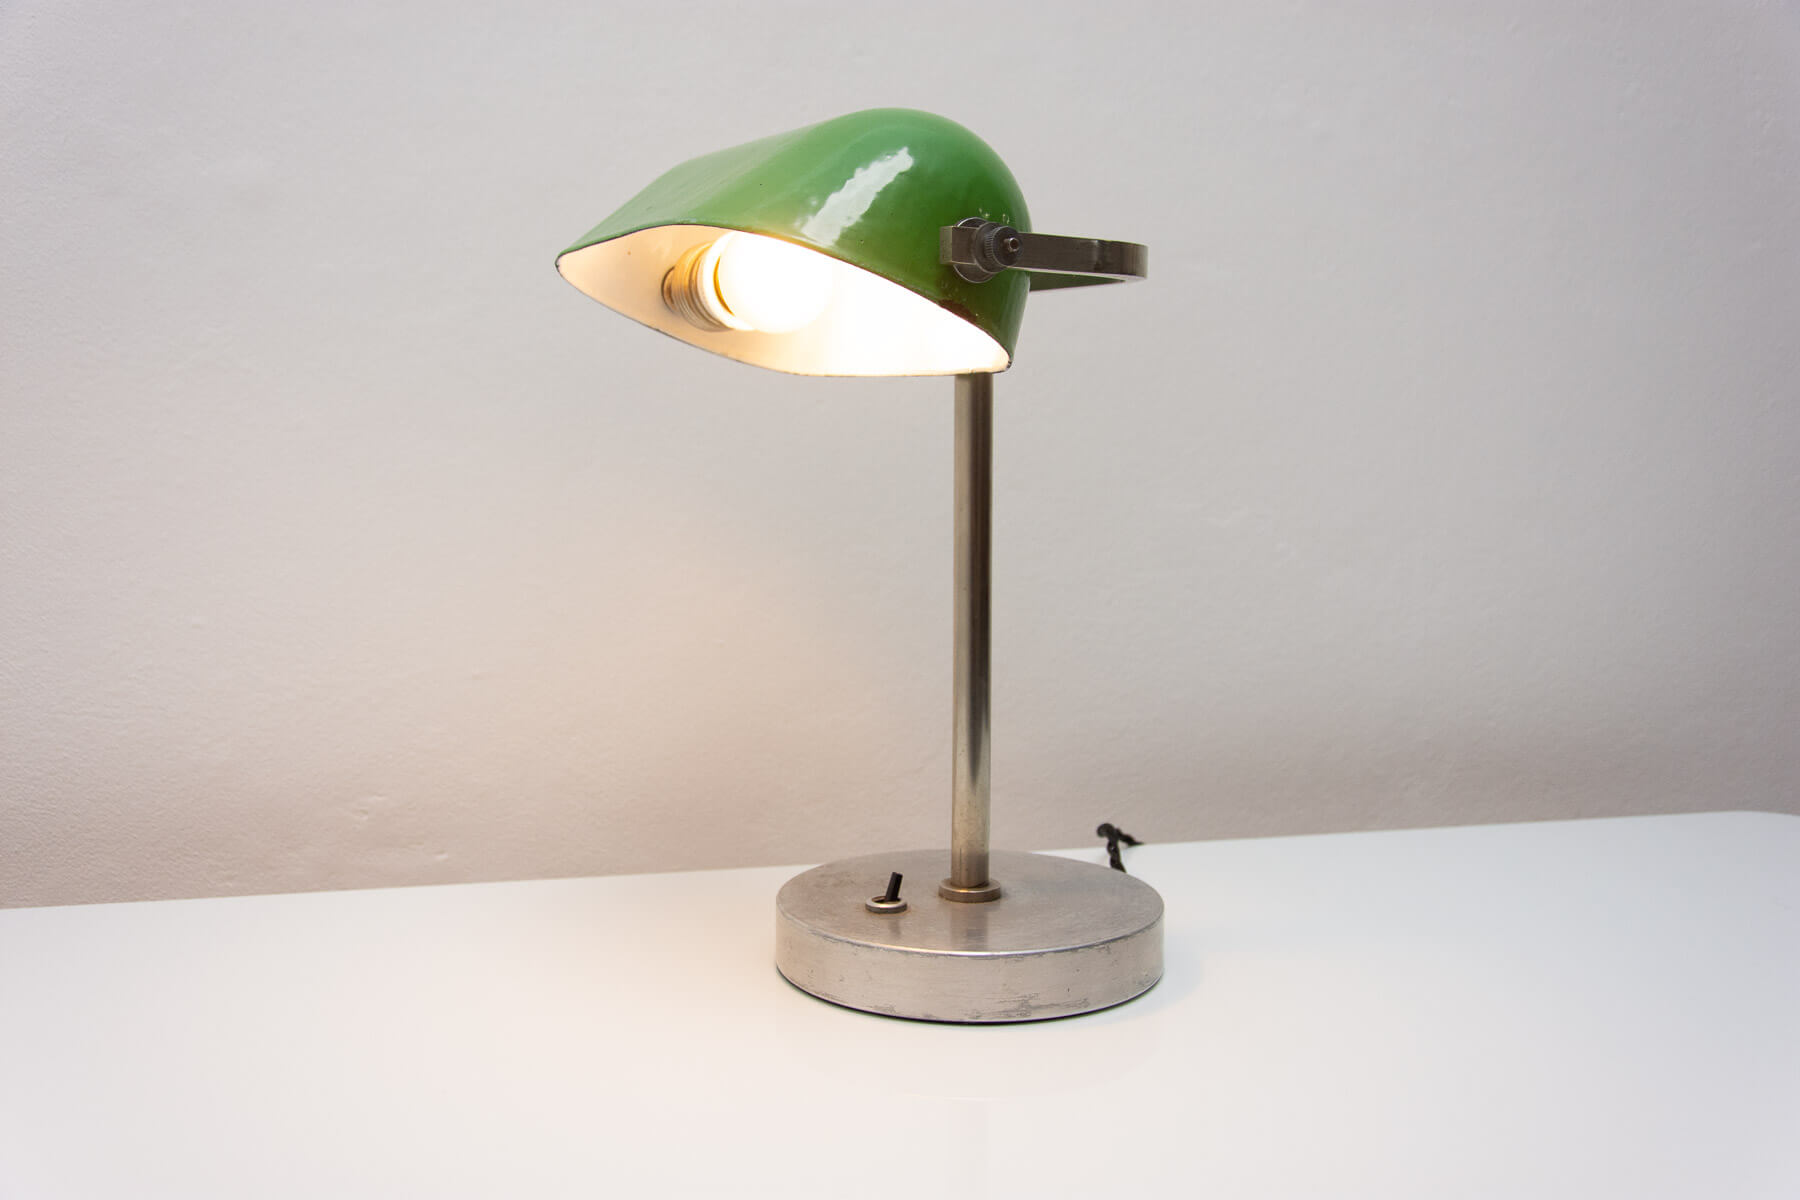 Ministerial brass table lamp with green glass shade. Made in Italy